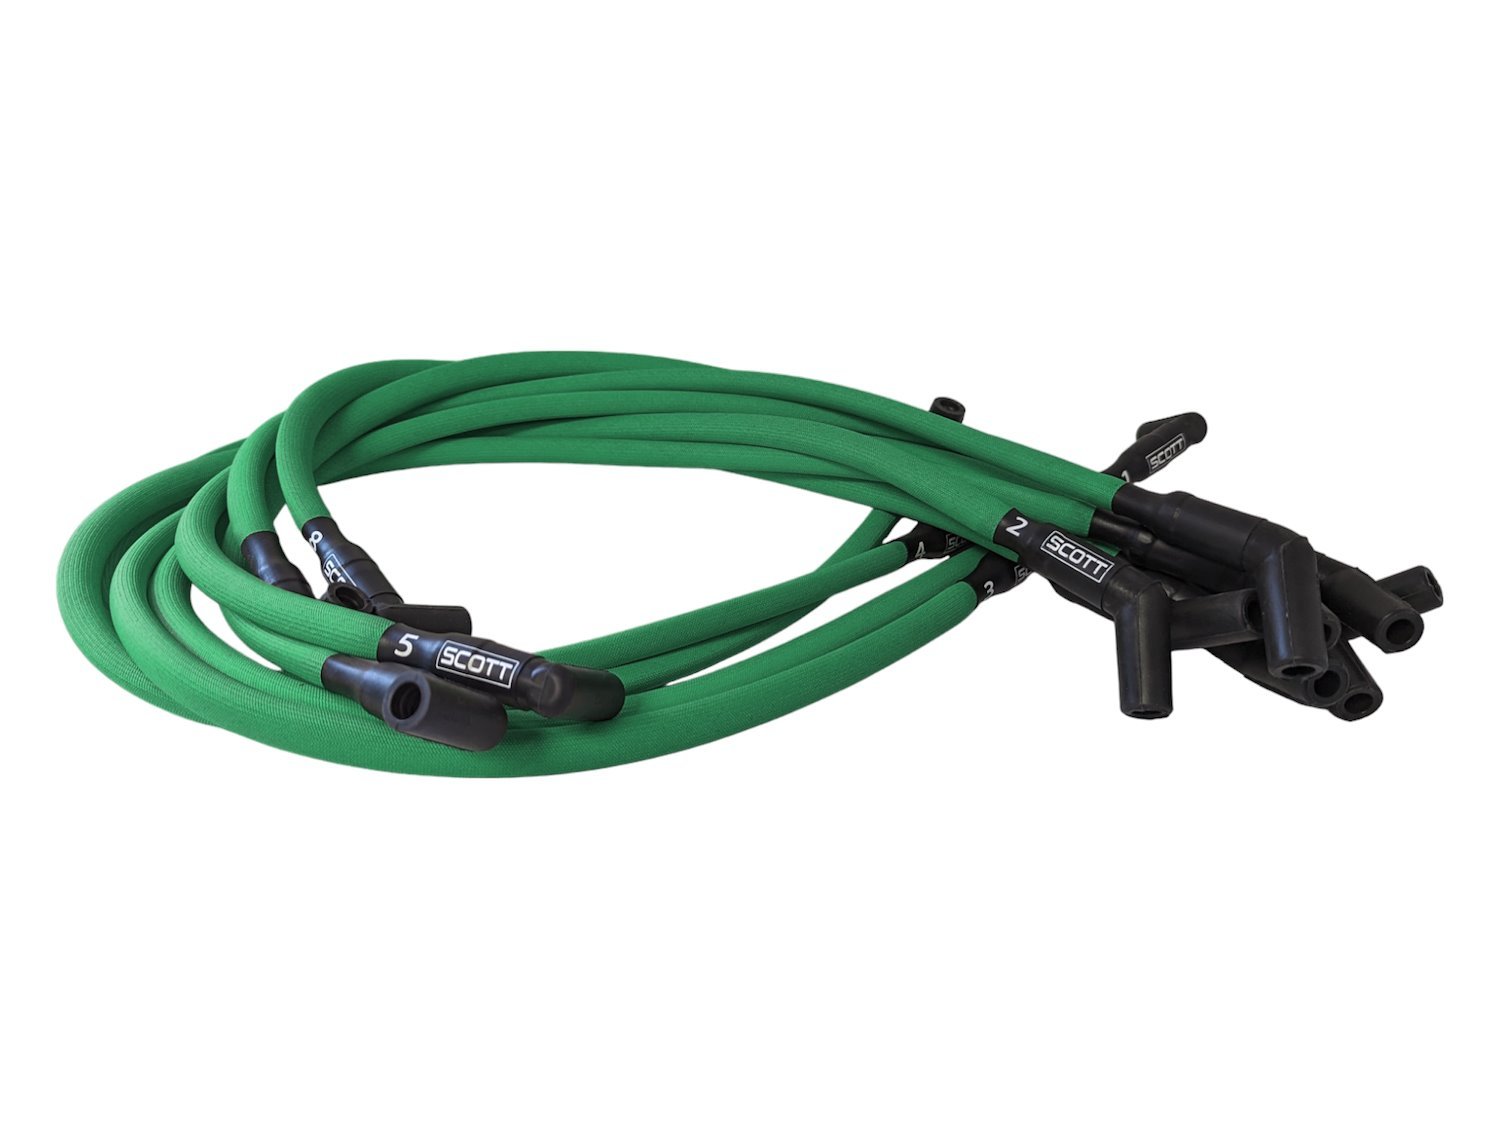 SPW300-PS-429-4 Super Mag Fiberglass-Oversleeved Spark Plug Wire Set for Big Block Ford, Over Valve Cover [Green]